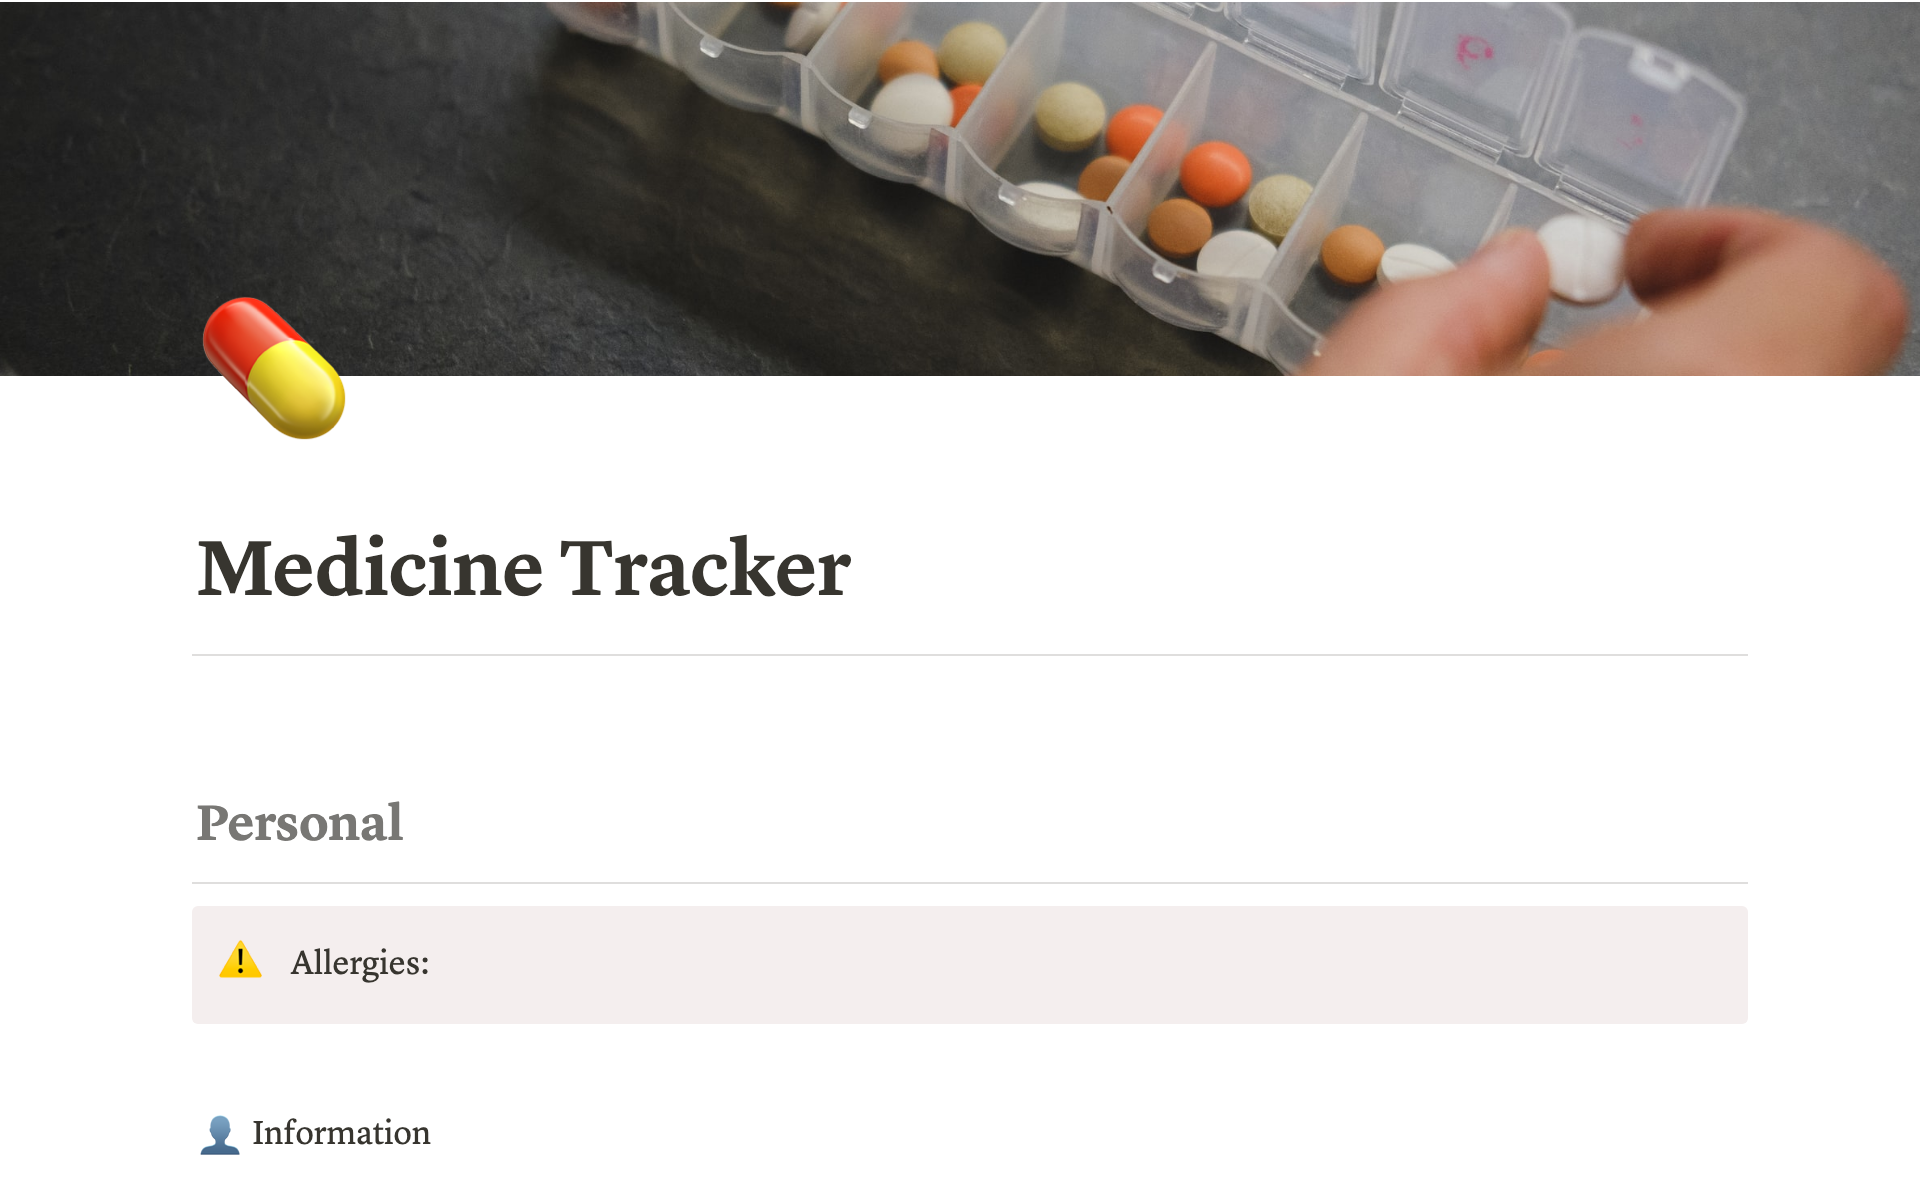 It's a medicine tracker that helps to prepare and organize pill boxes.